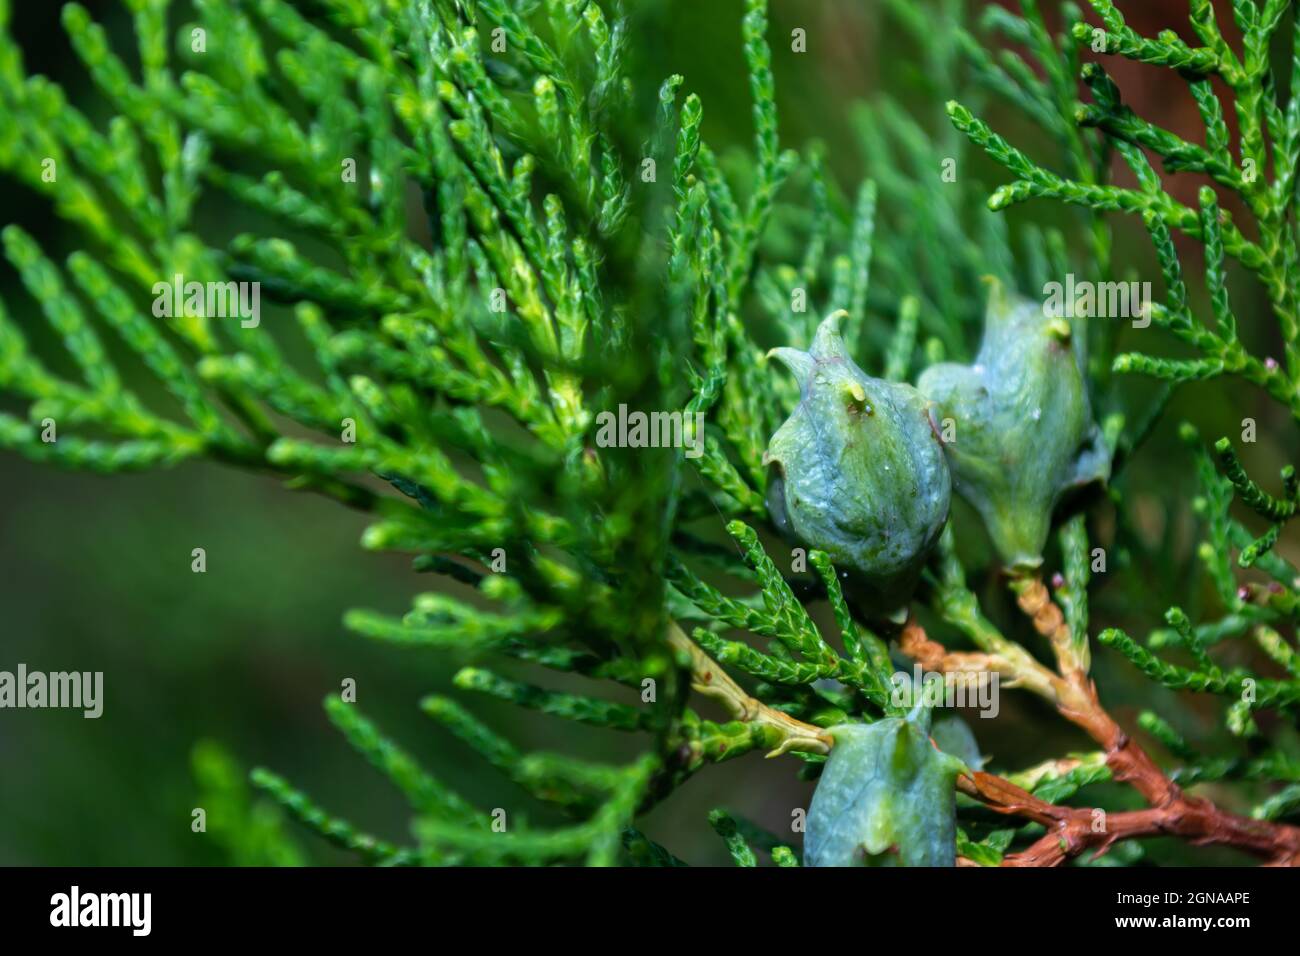 Small green cones of the thuja tree against the background of juicy and dense needles. Evergreen trees. Stock Photo